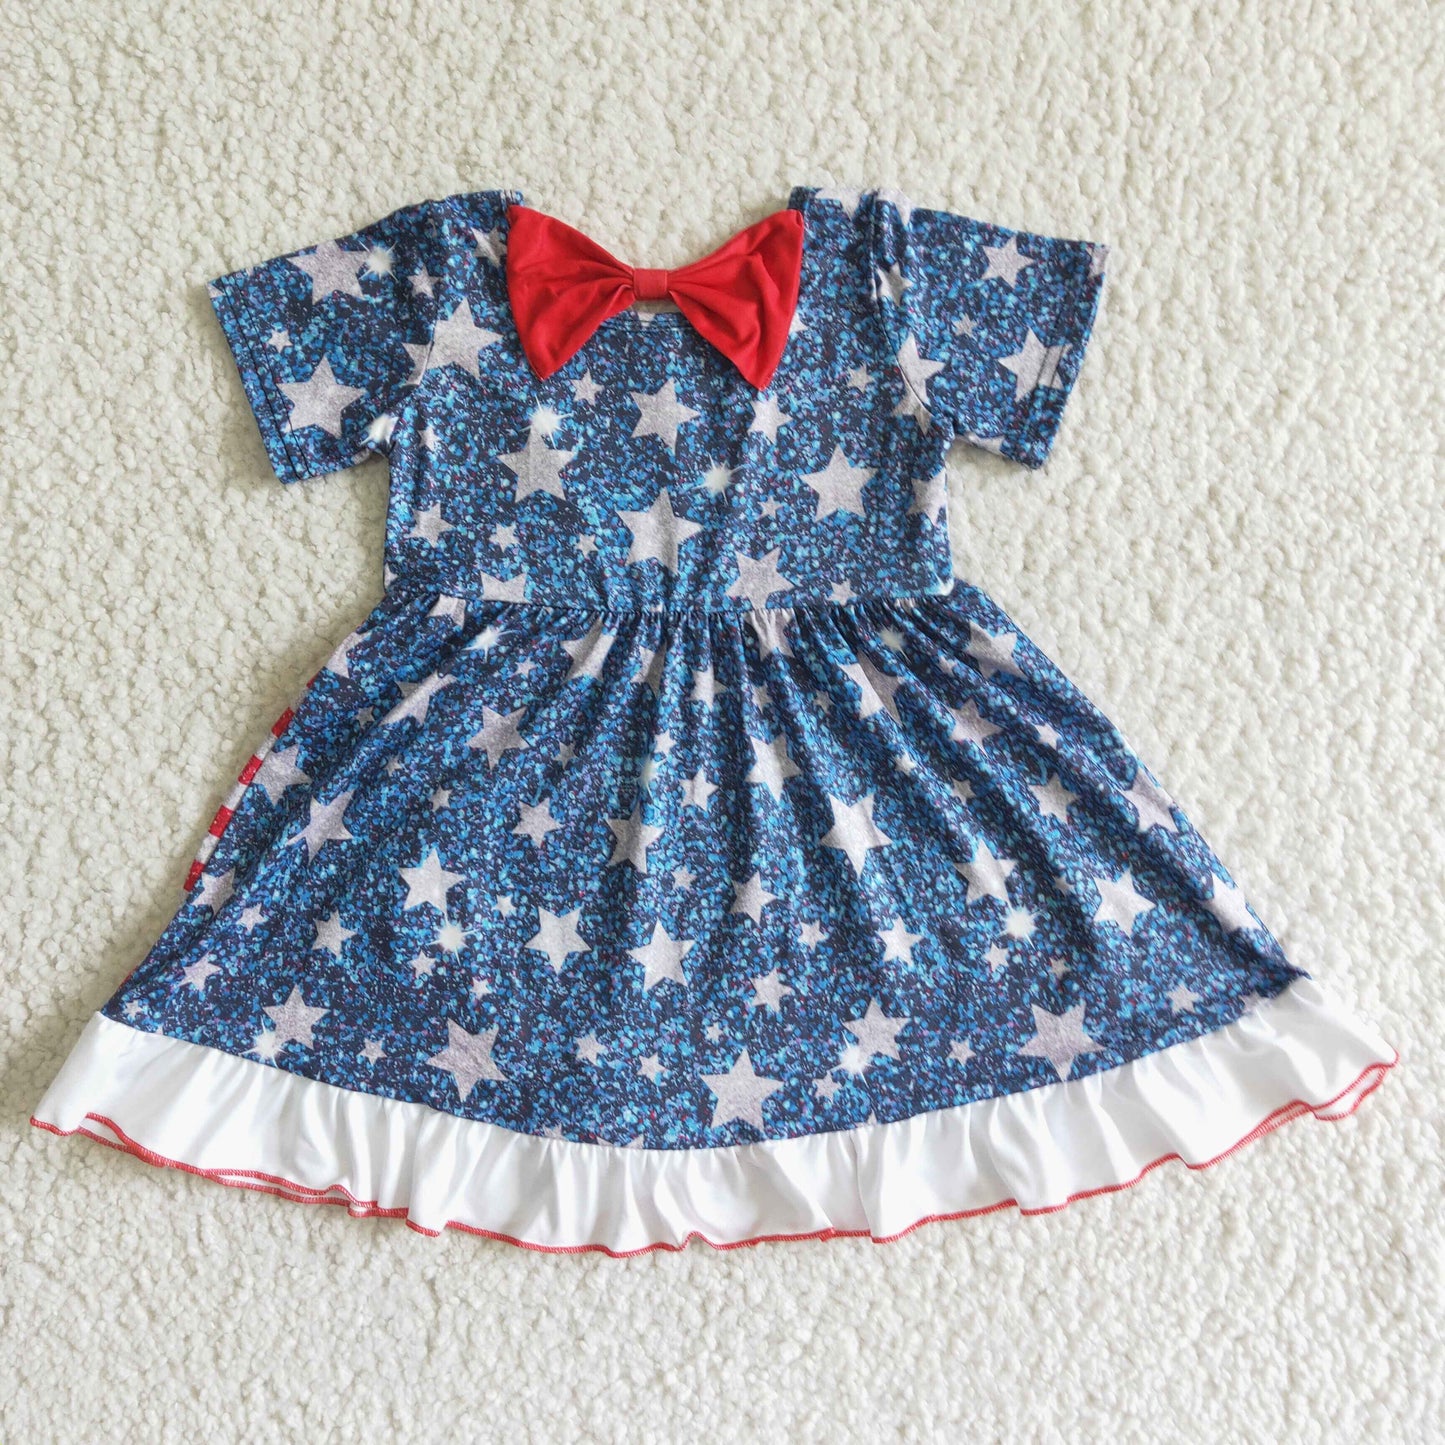 girl's july 4th clothing blue star and red stripe twirl dress